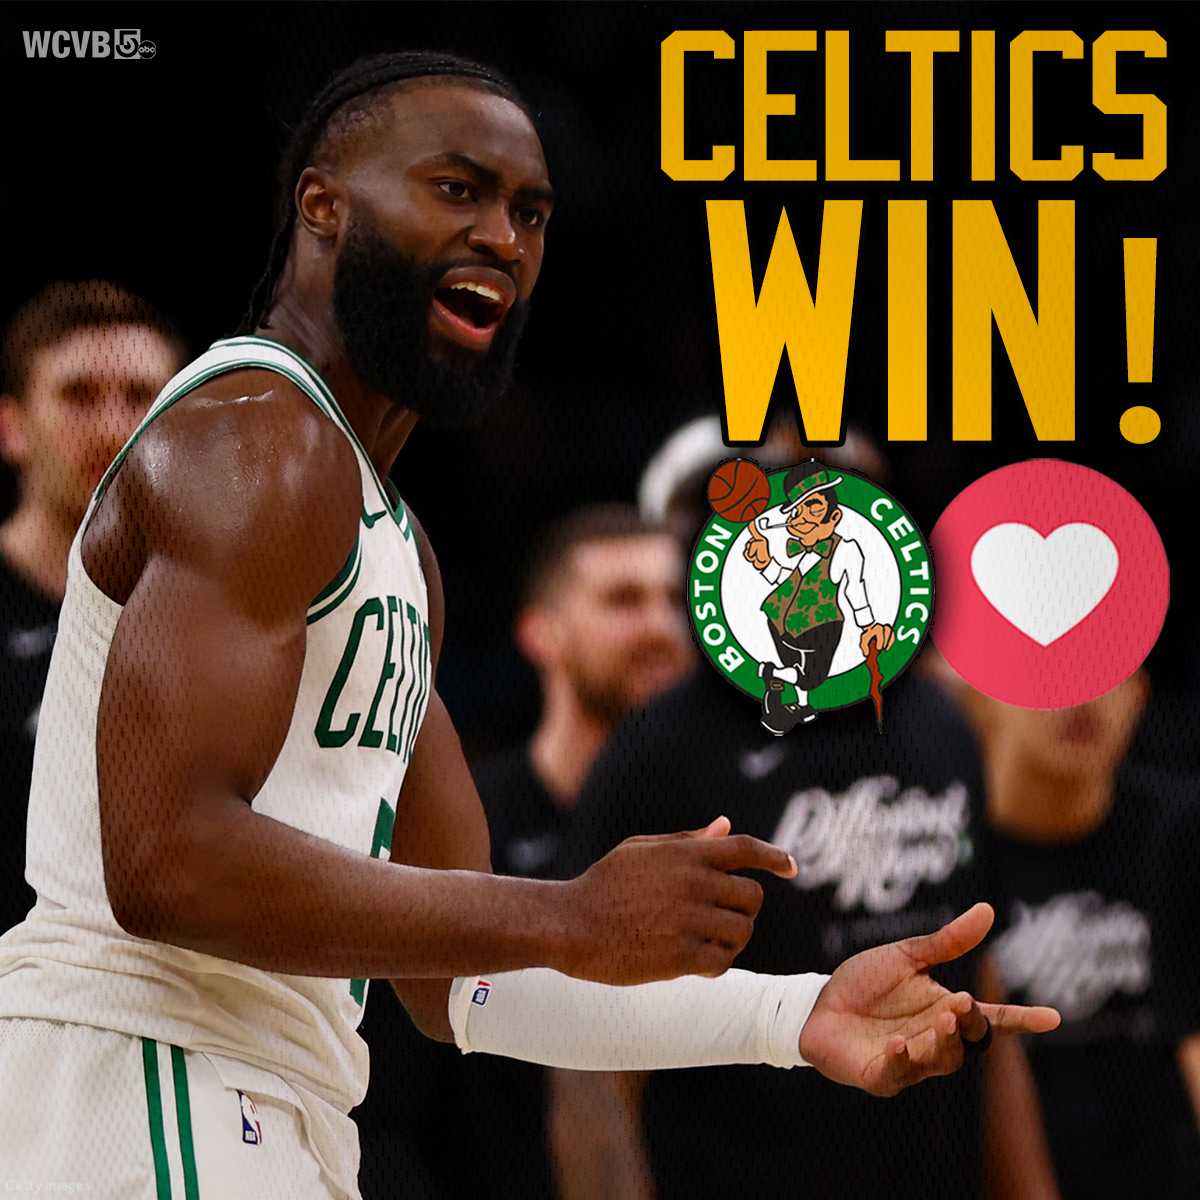 HEARTSTOPPING ENDING! Jaylen Brown kept the #Celtics hopes alive and some clutch baskets in overtime sealed the Game 1 win for the C's! ❤️☘️🏀